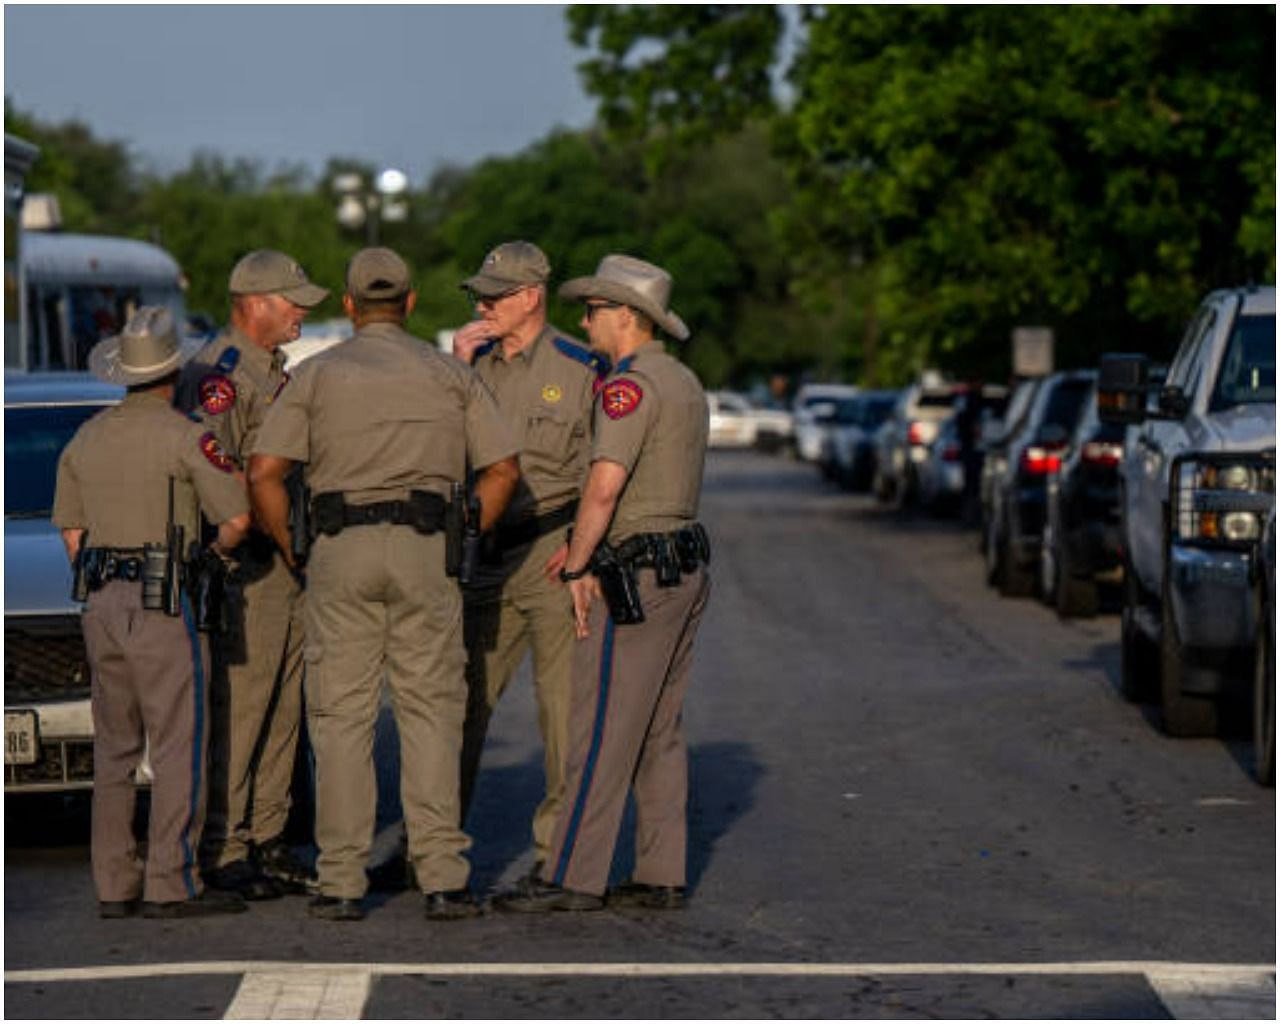 Two police officers were also shot in the attack (Image via Getty)